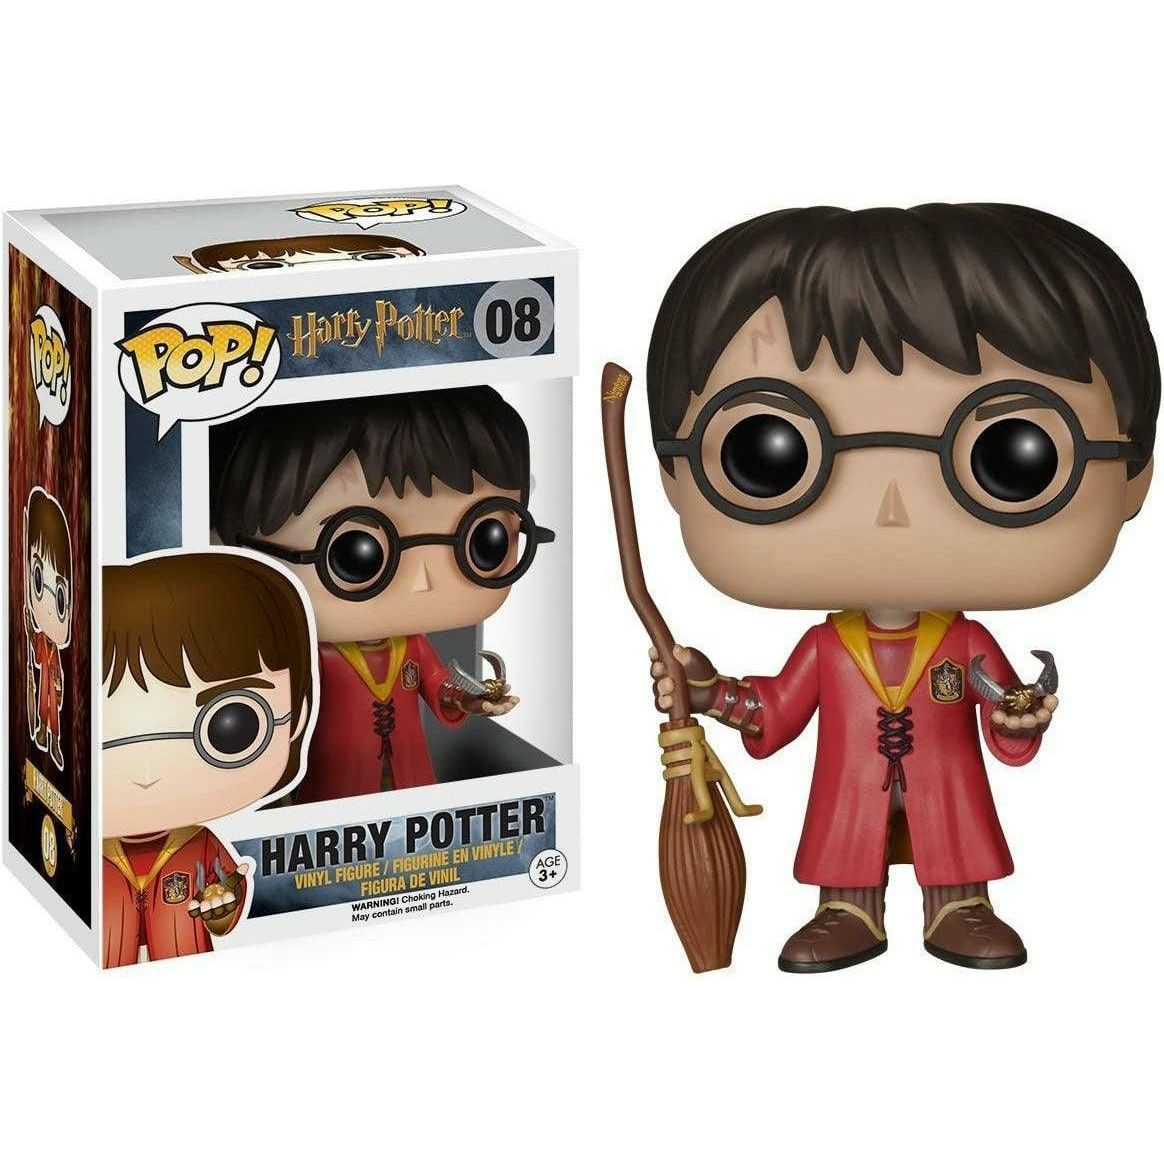 Funko POP Harry Potter - Quidditch Harry - BumbleToys - 18+, 5-7 Years, Boys, Fashion Dolls & Accessories, Funko, Harry Potter, Pre-Order